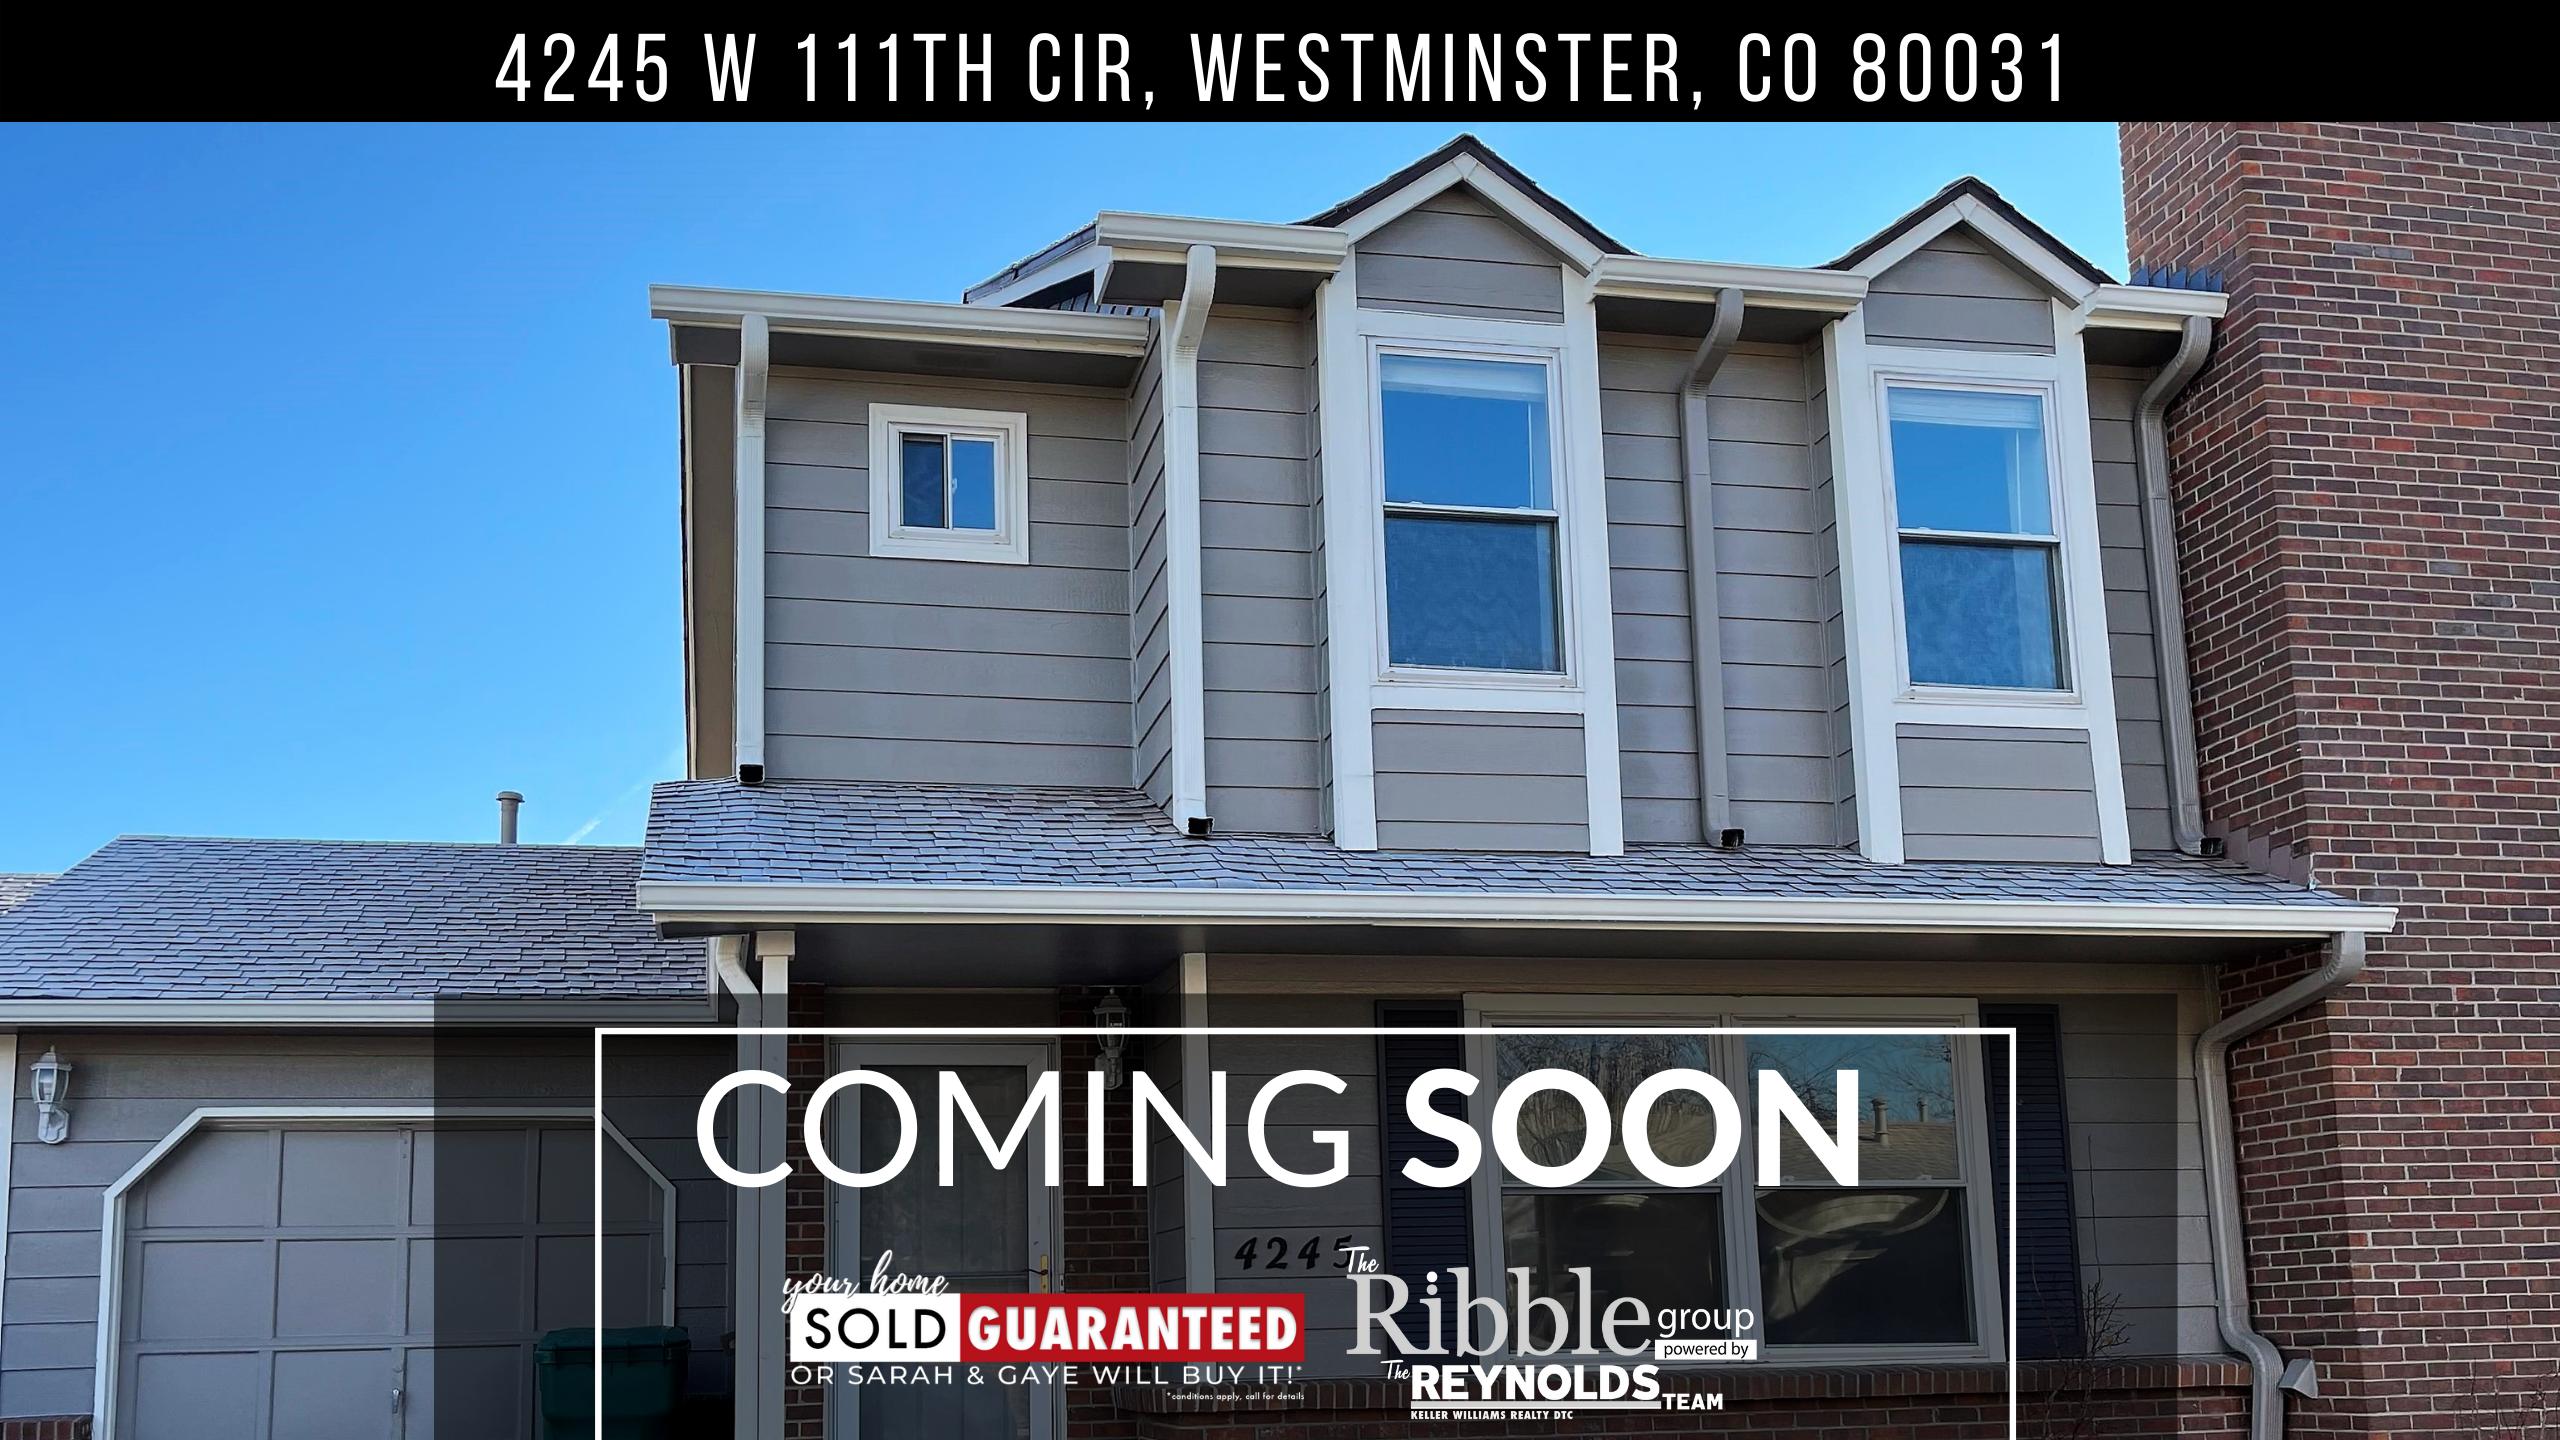 4245 W 111th Cir, Westminster, CO 80031